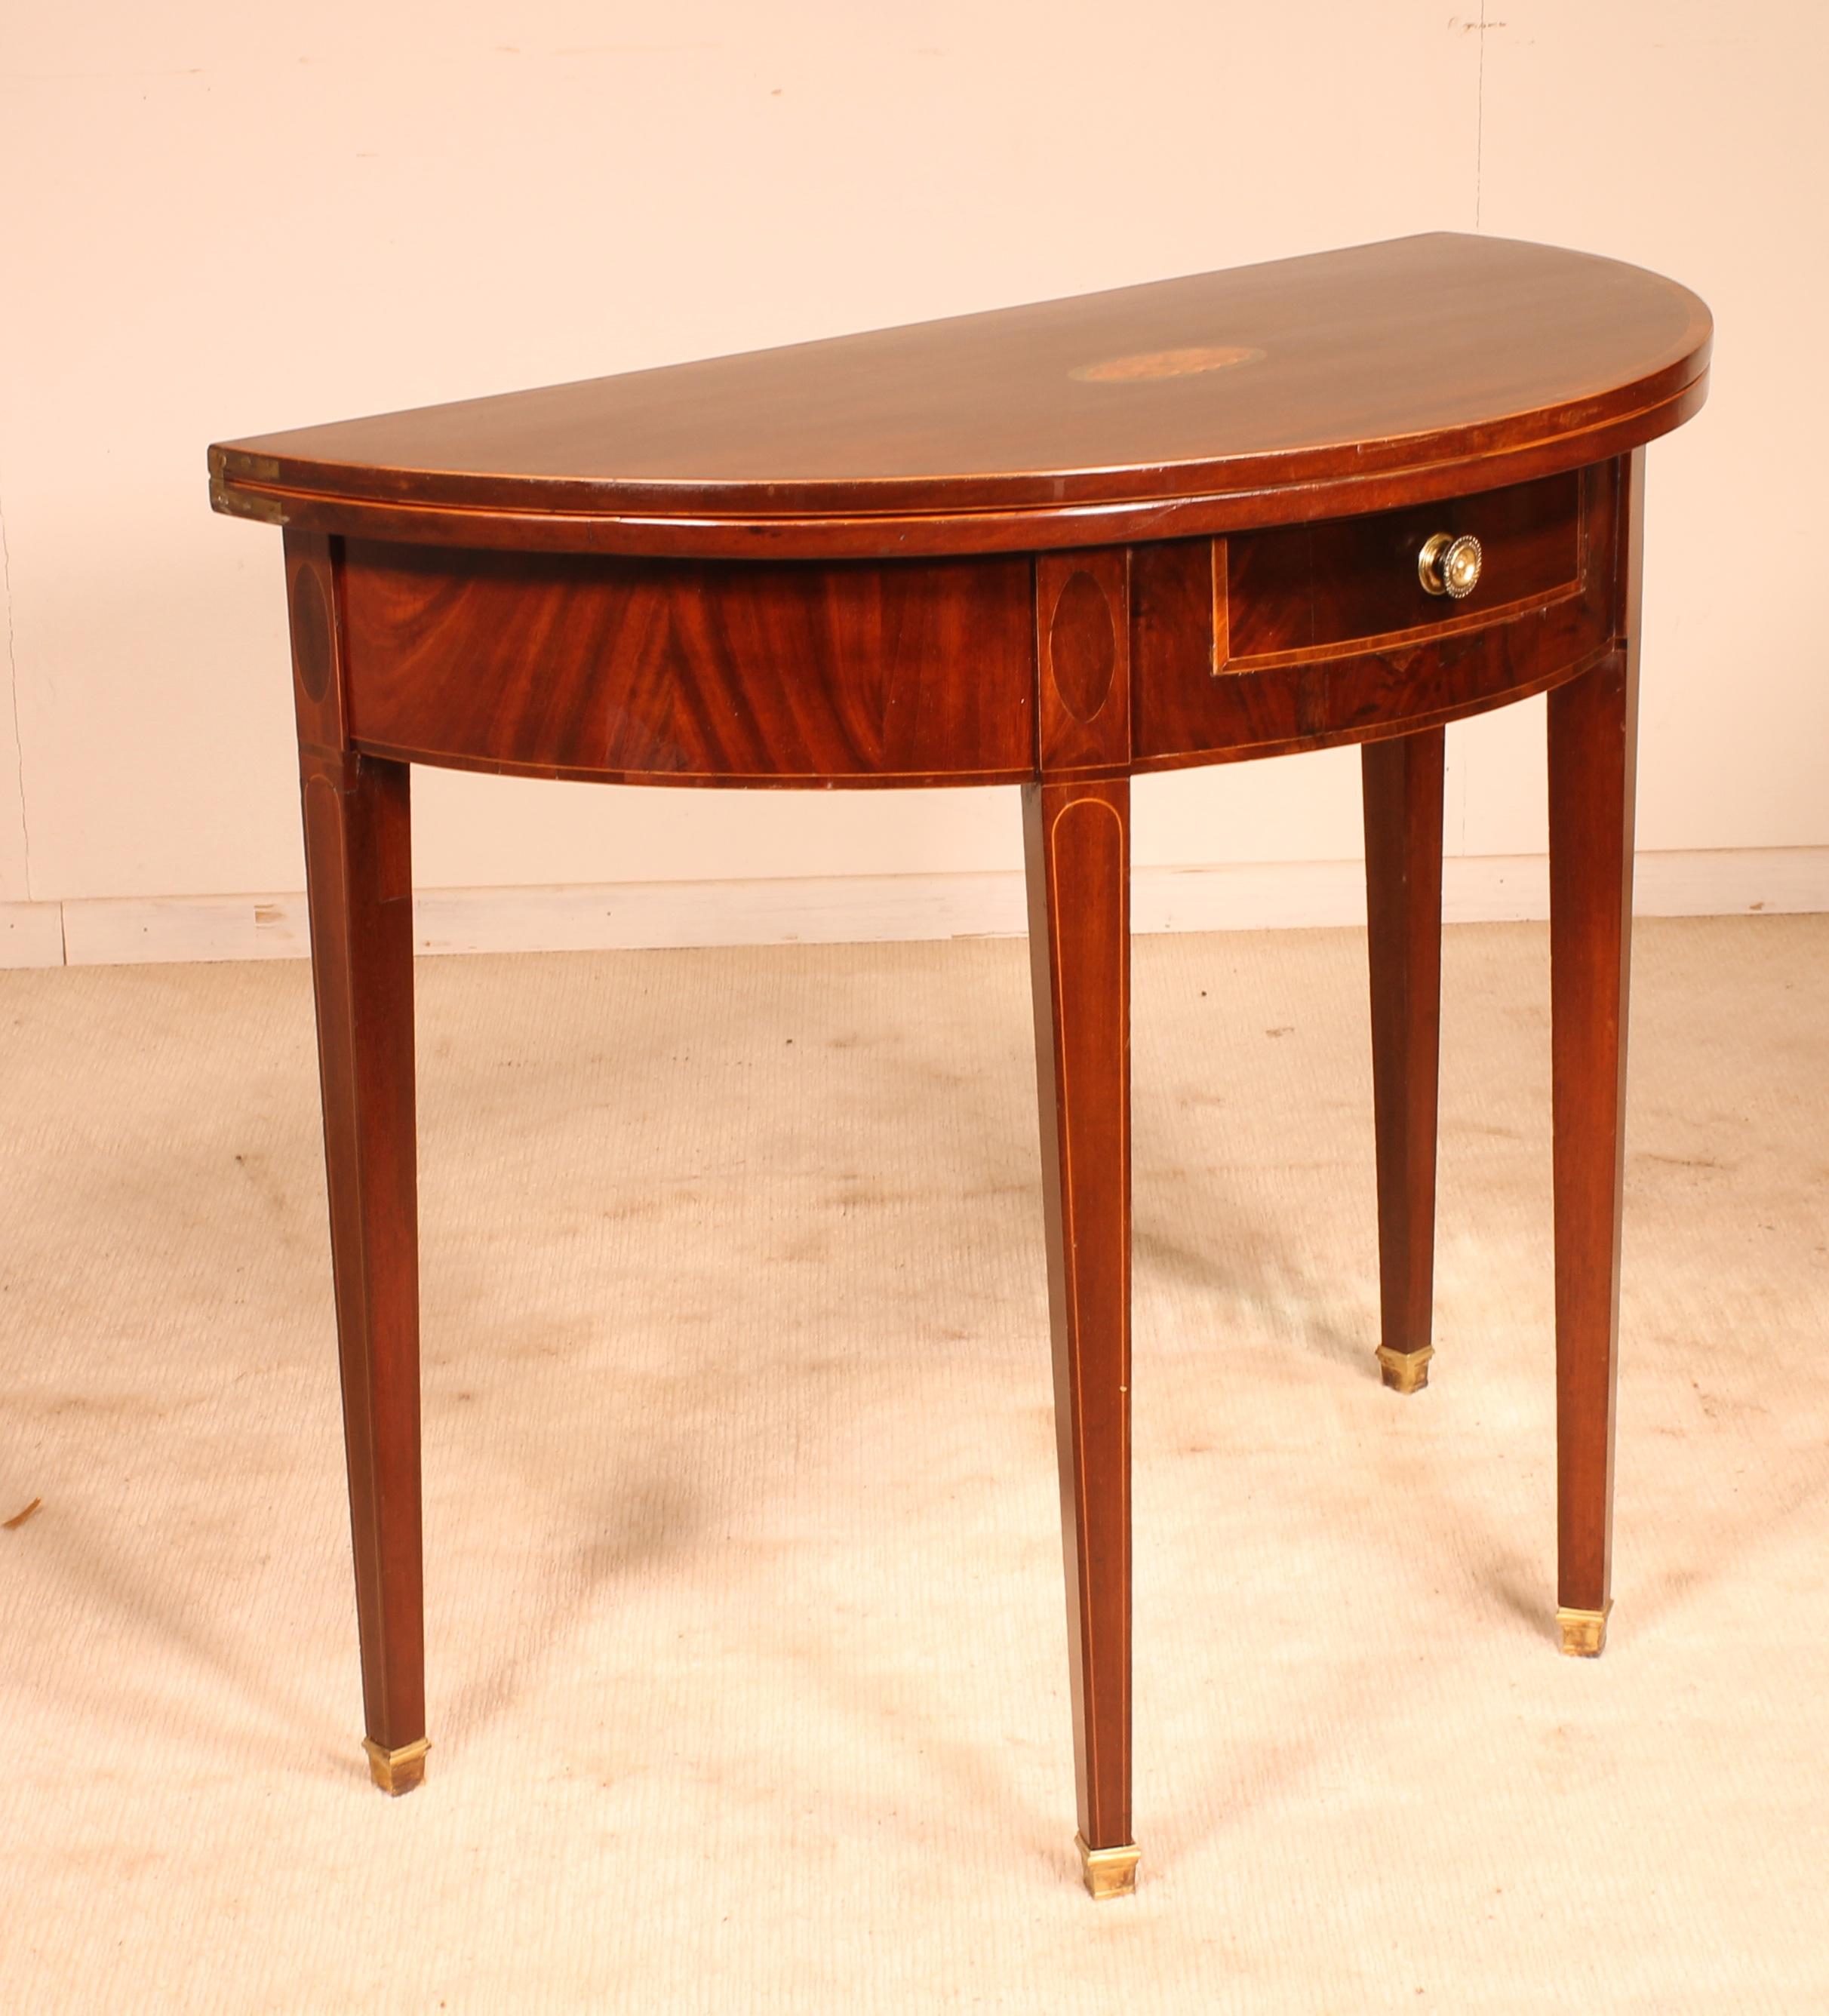 Beautiful console / half-moon table from the early 19th century in superb condition Regency period

Very beautiful English mahogany table that has a beautiful base with straight legs with fine inlay and a drawer in its belt

The console has a